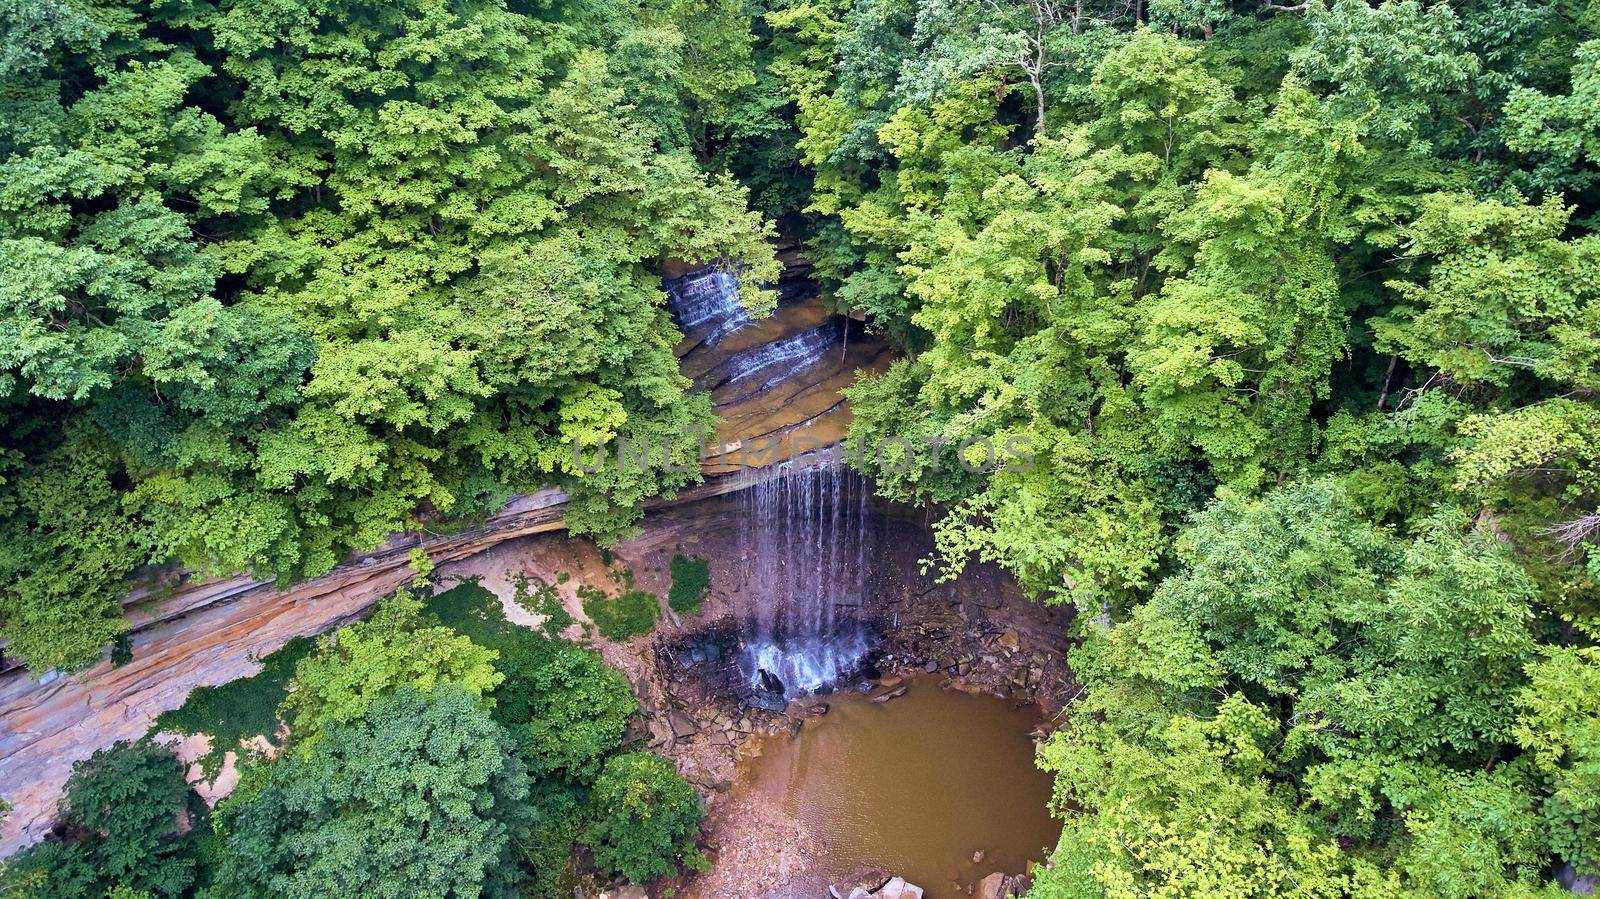 Image of Woods with cliffs and large waterfall pouring into brown river